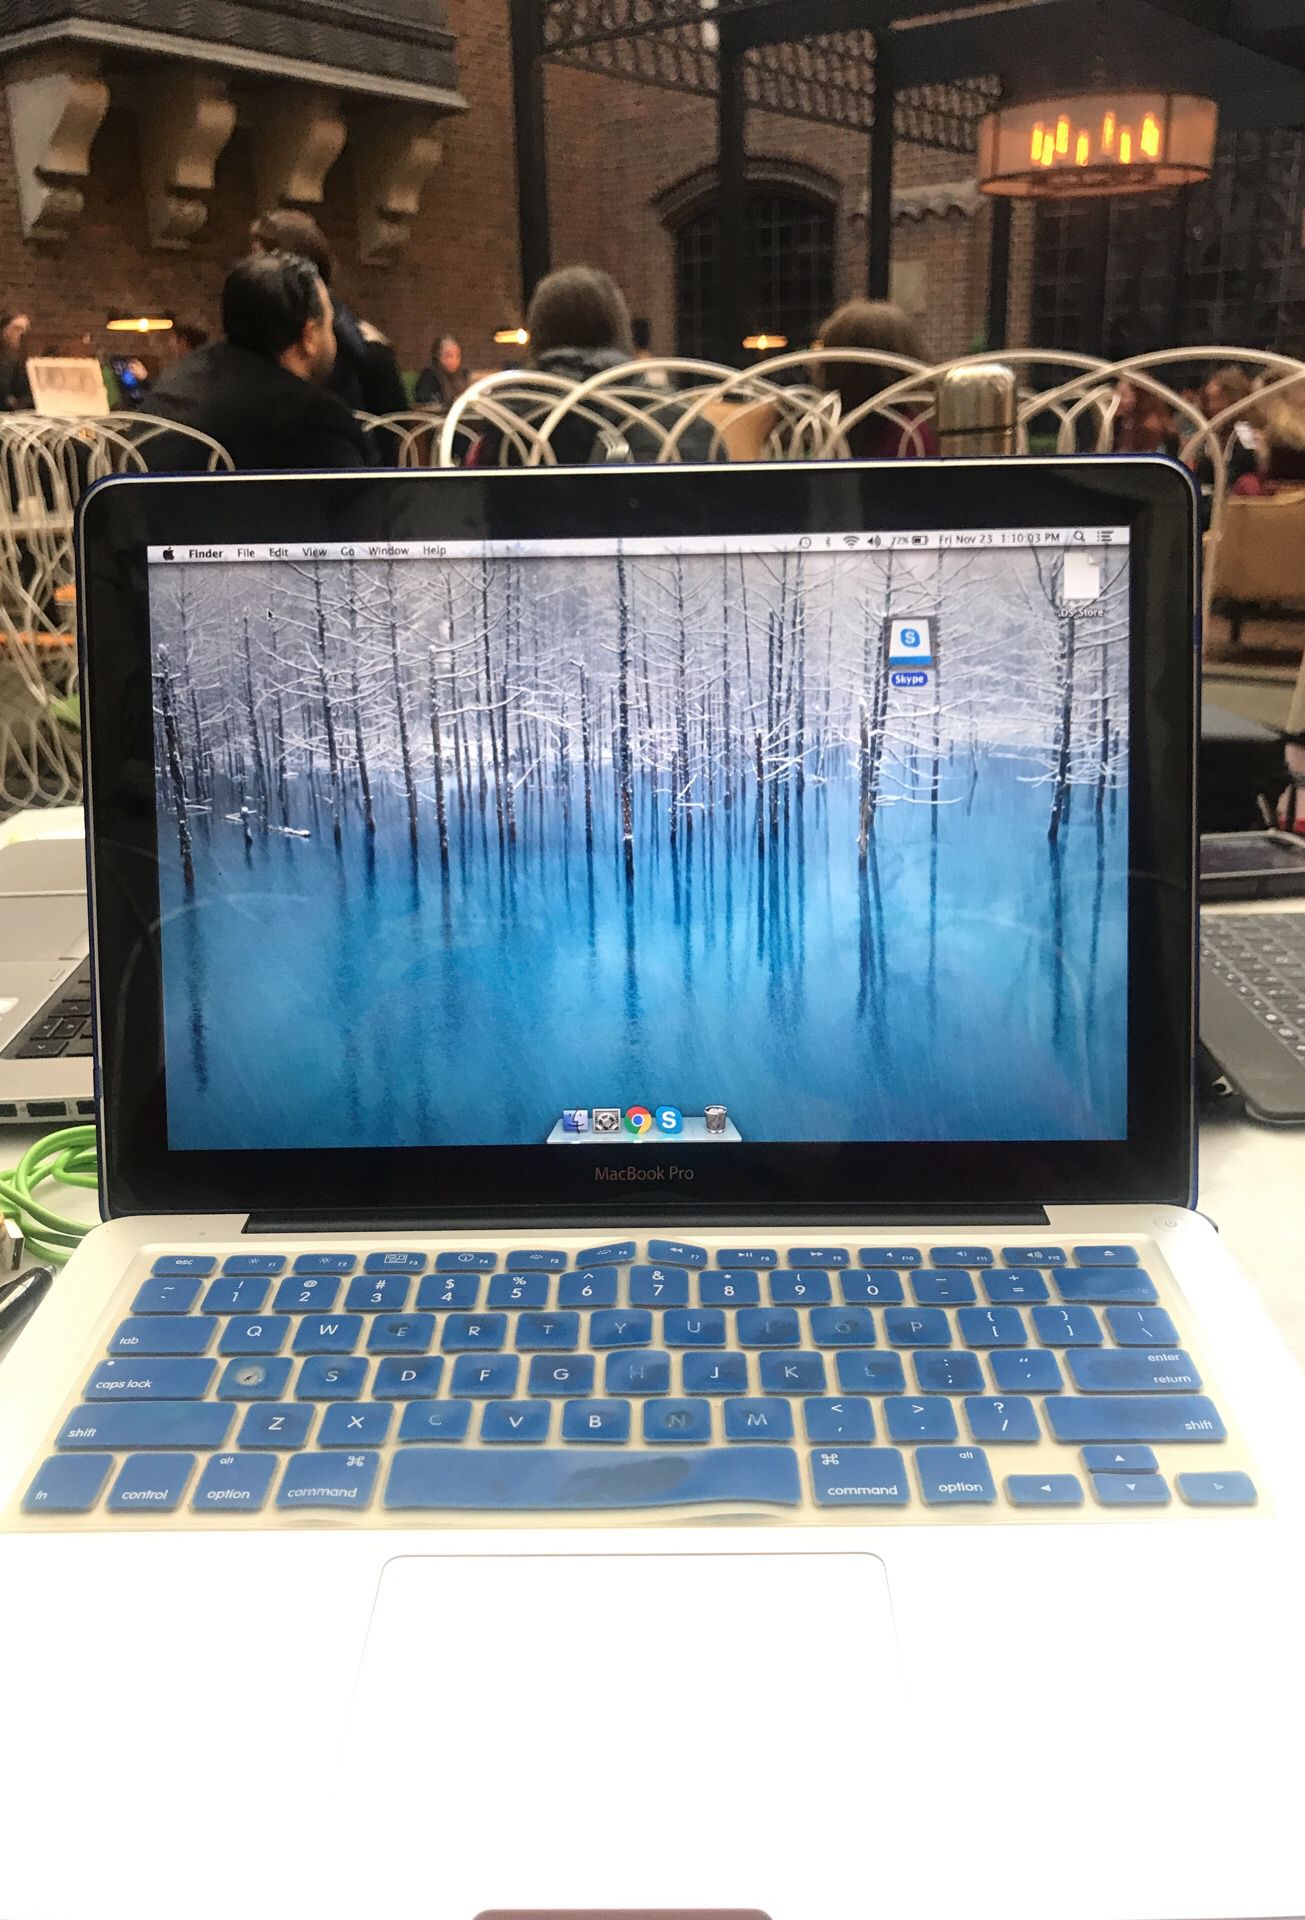 2013 MacBook Pro $325 OBO - excellent condition- pick up today!